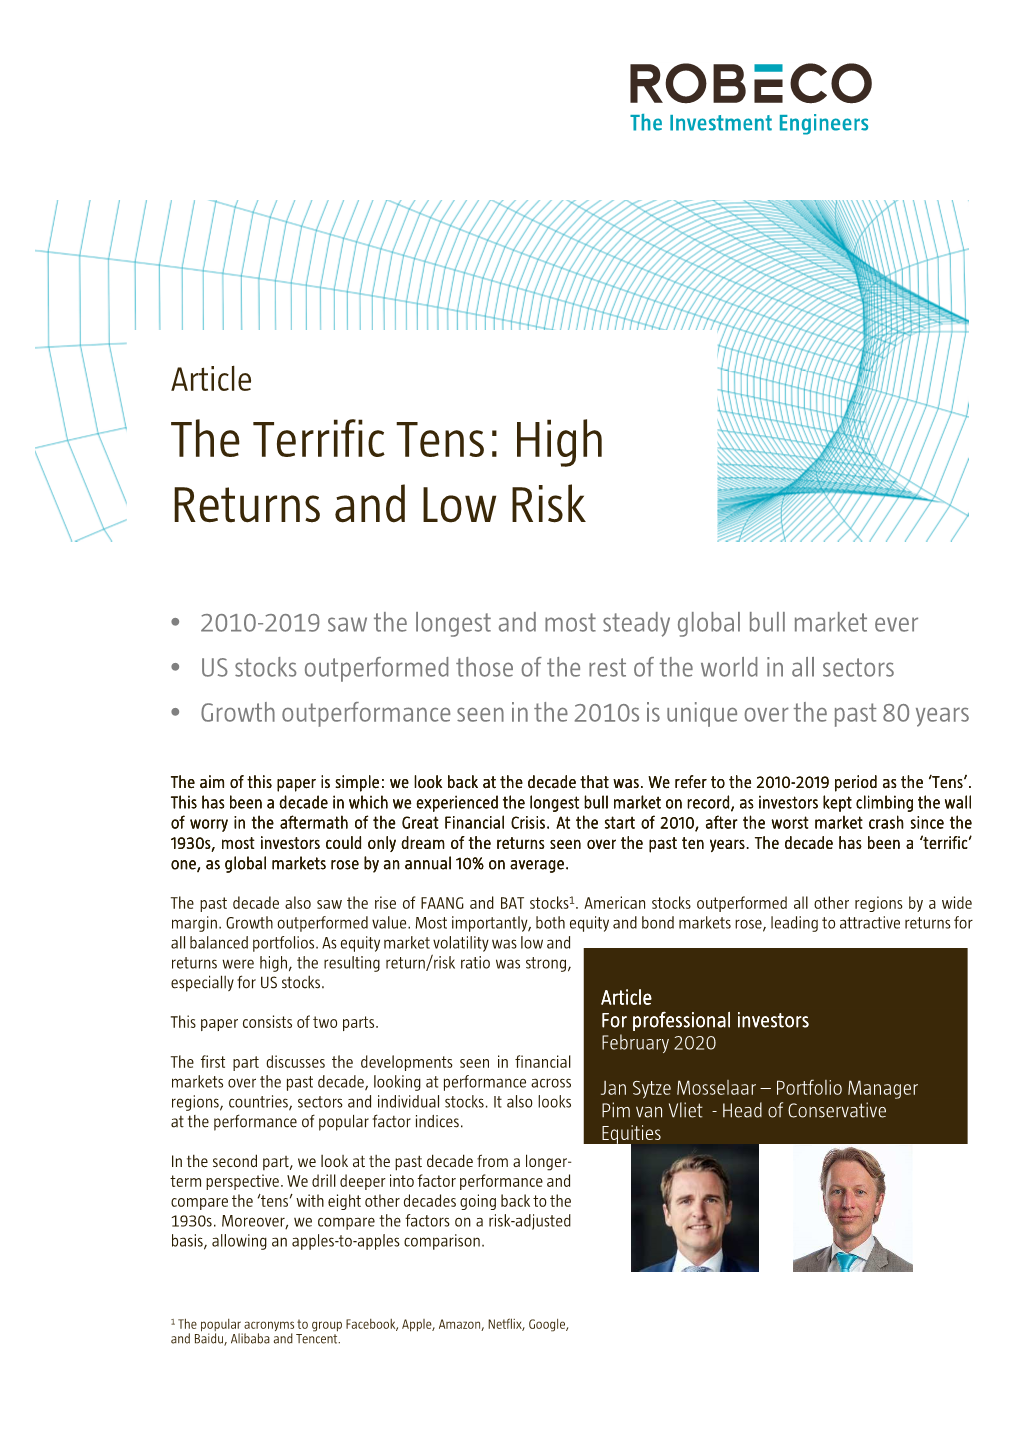 The Terrific Tens: High Returns and Low Risk